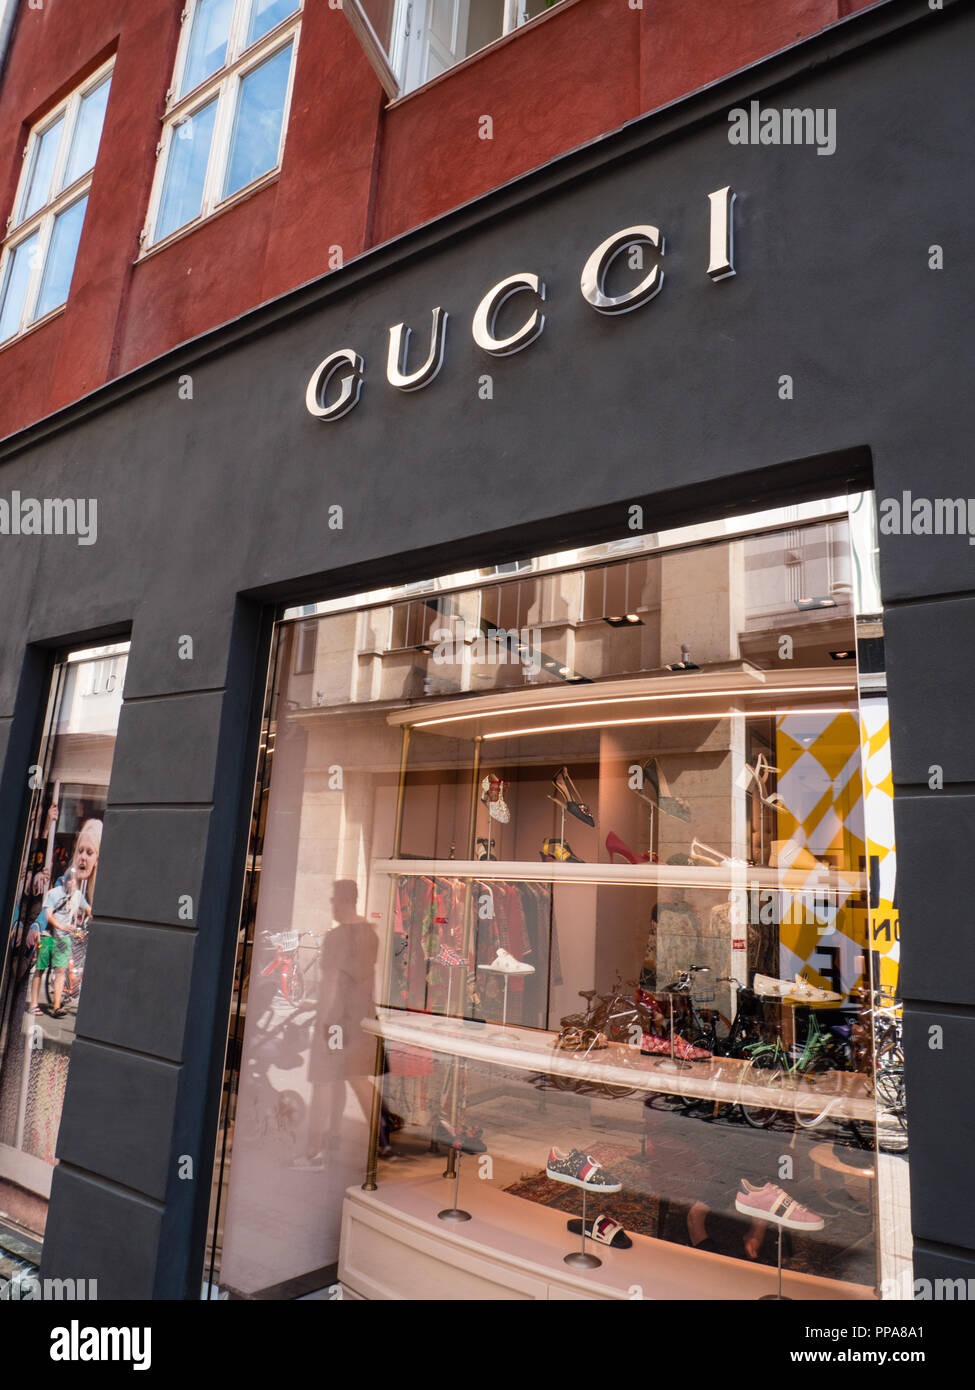 gucci europe store